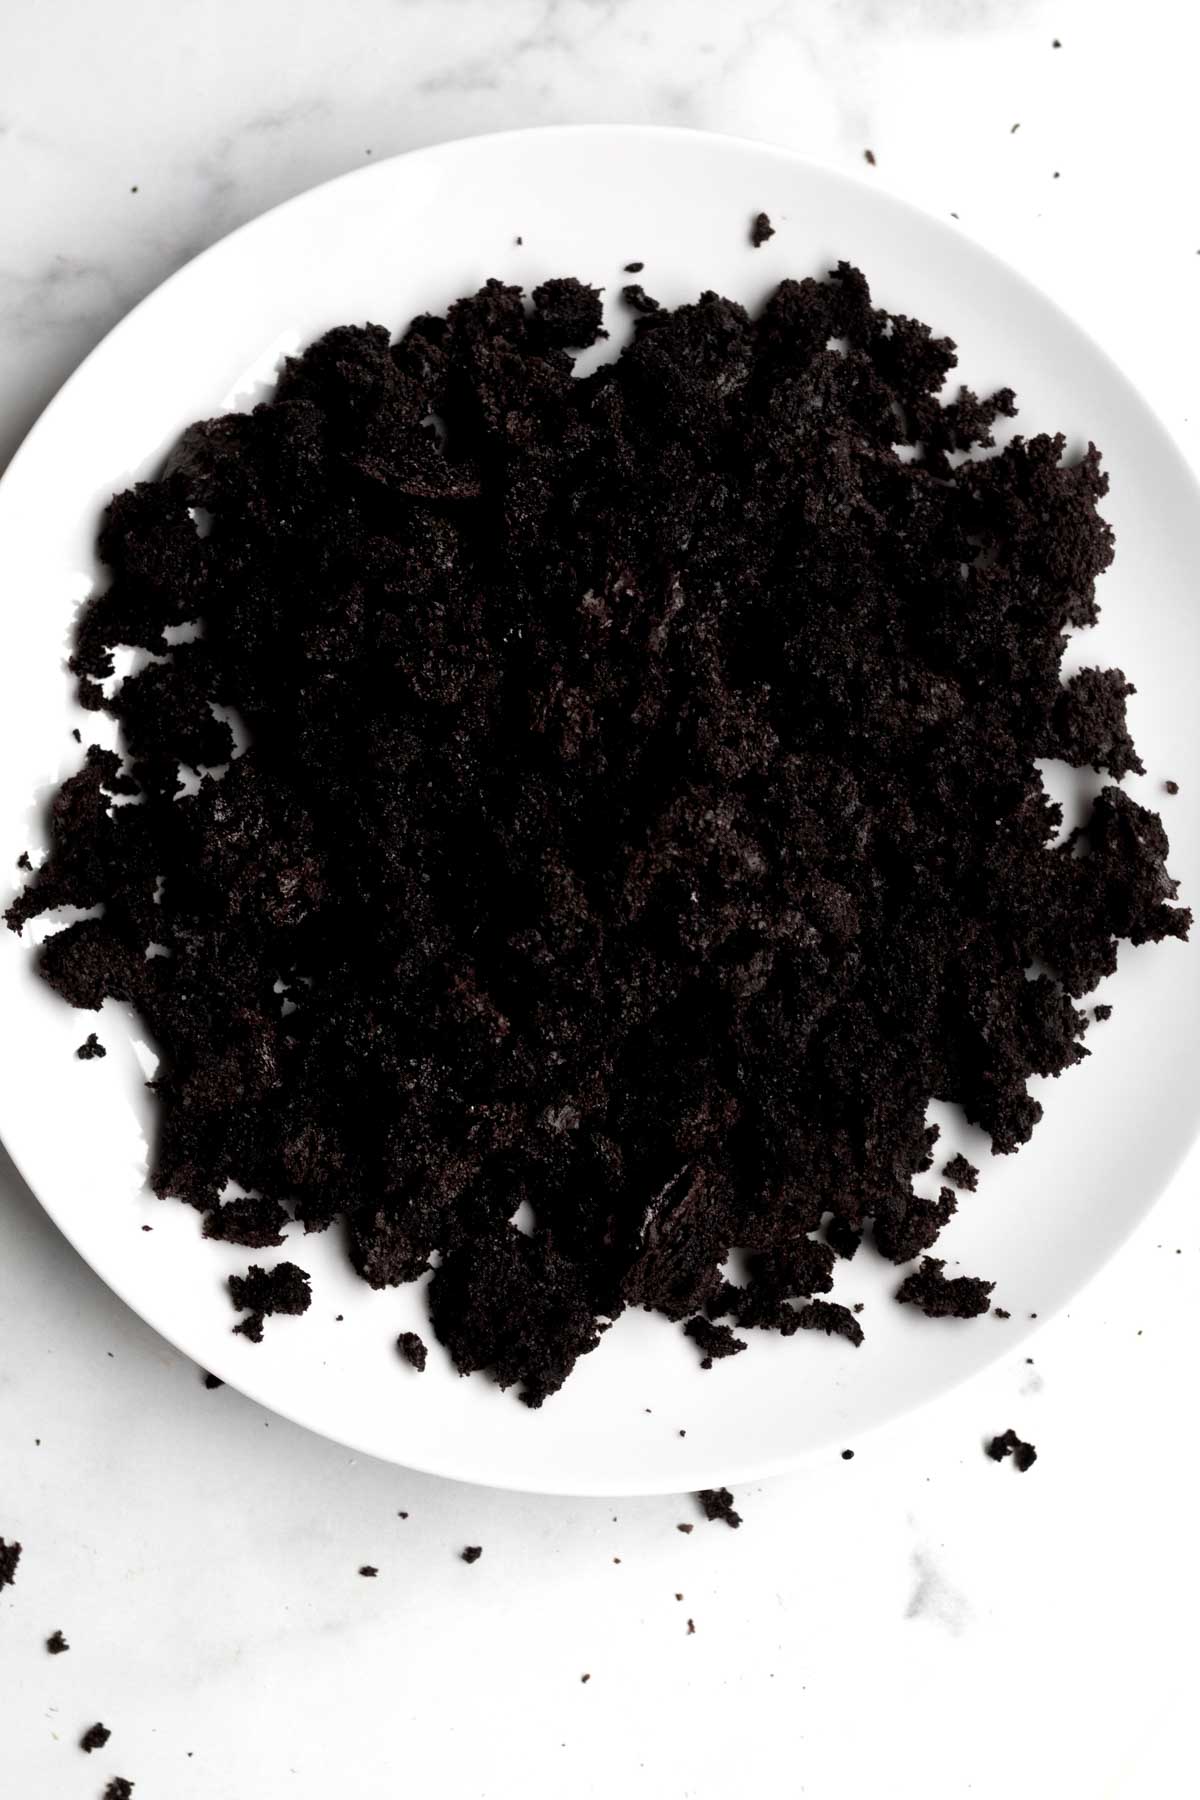 A plate of chocolate cake crumbles.